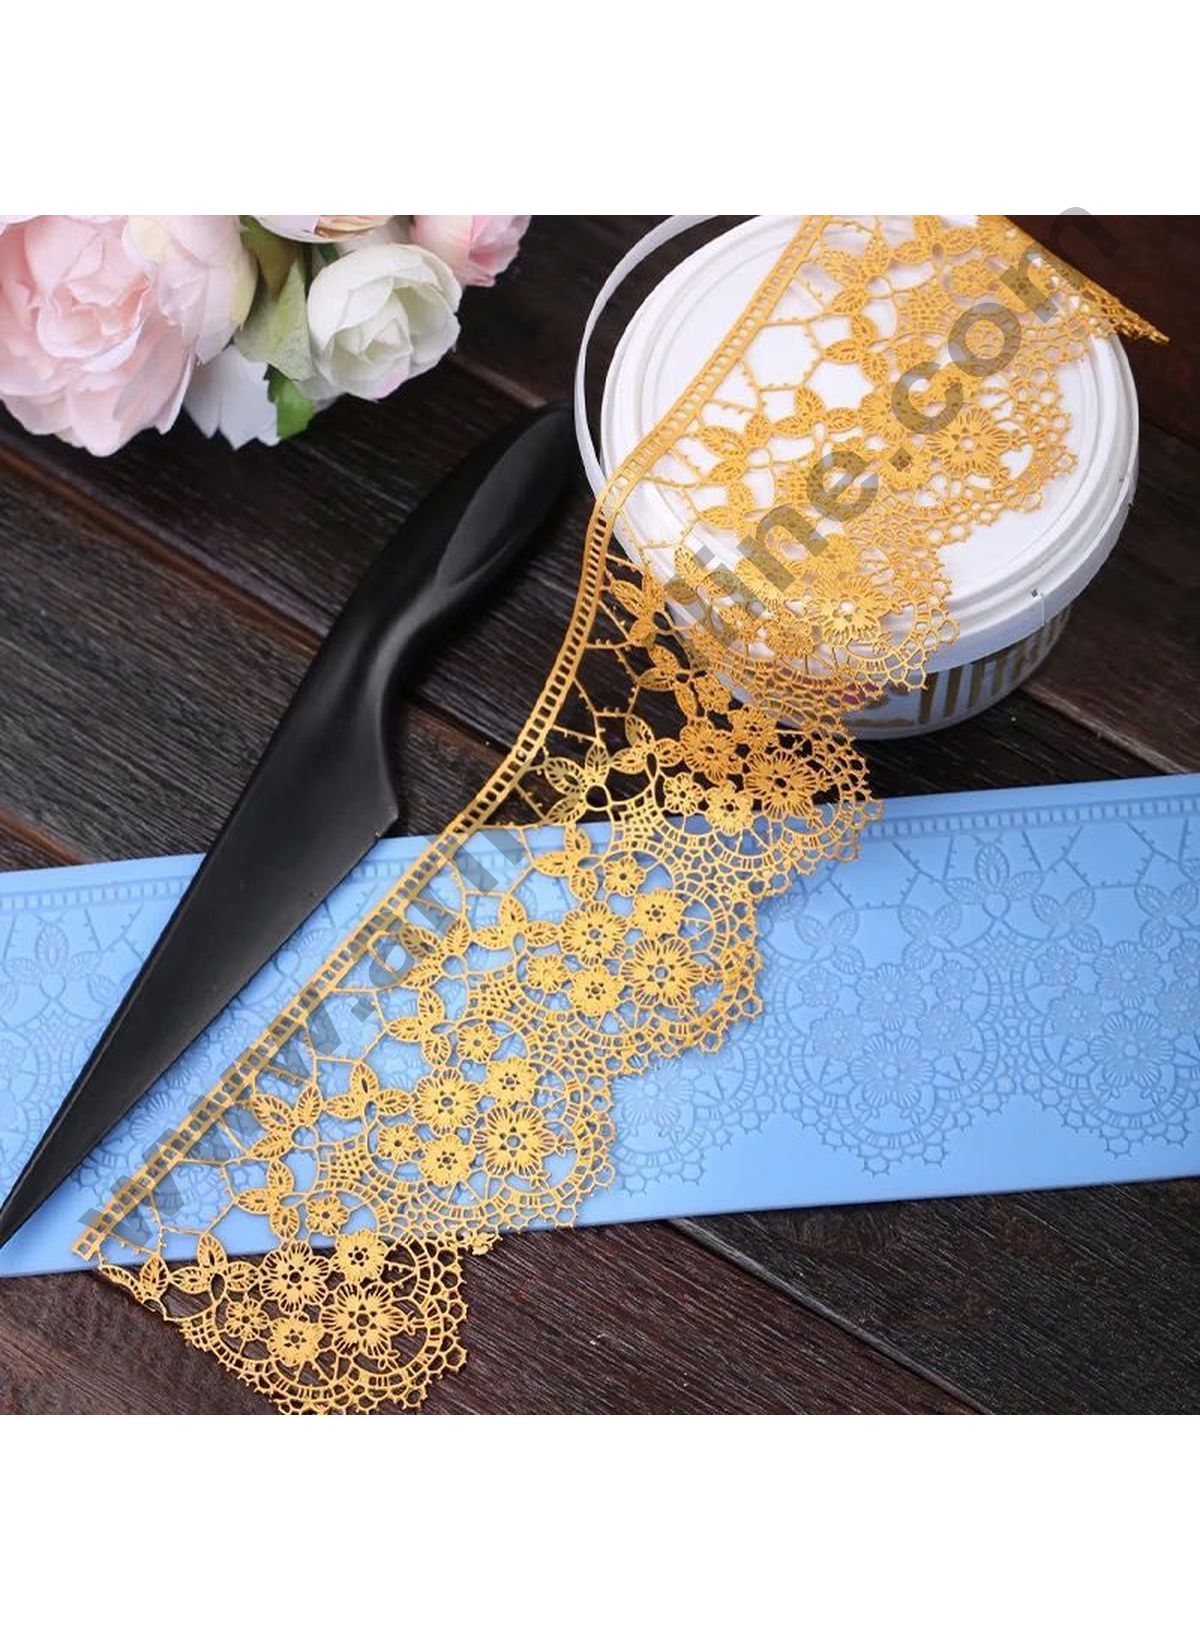 Madeline | Cake Lace Mats for Edible Cake Lace Mixes and Premixes | Cake  Decorating Craft